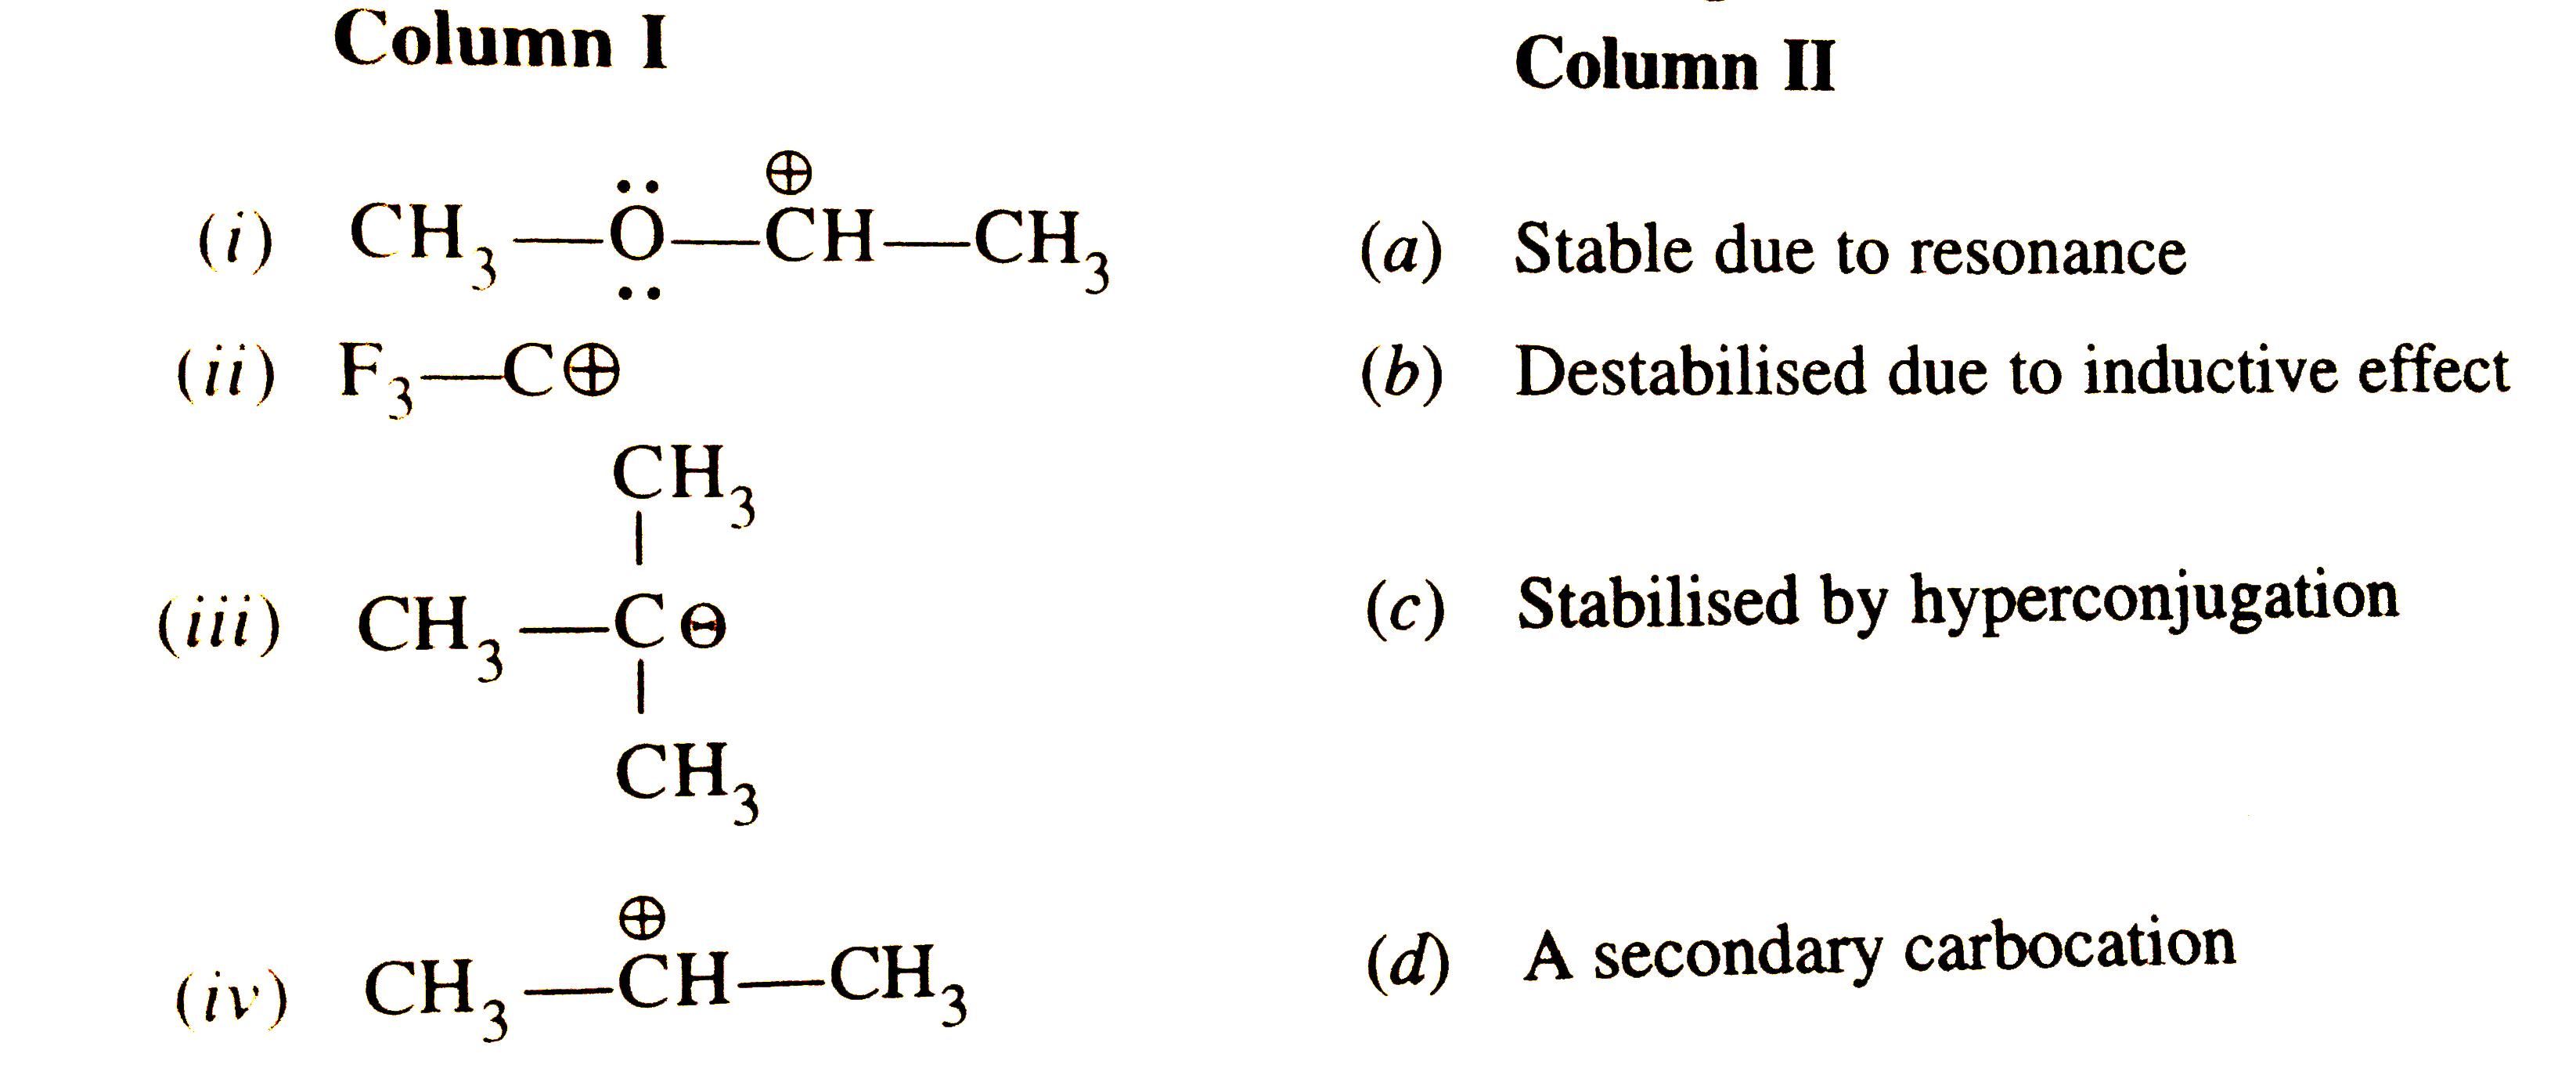 Match the ions given Column I with their nature in Column II.